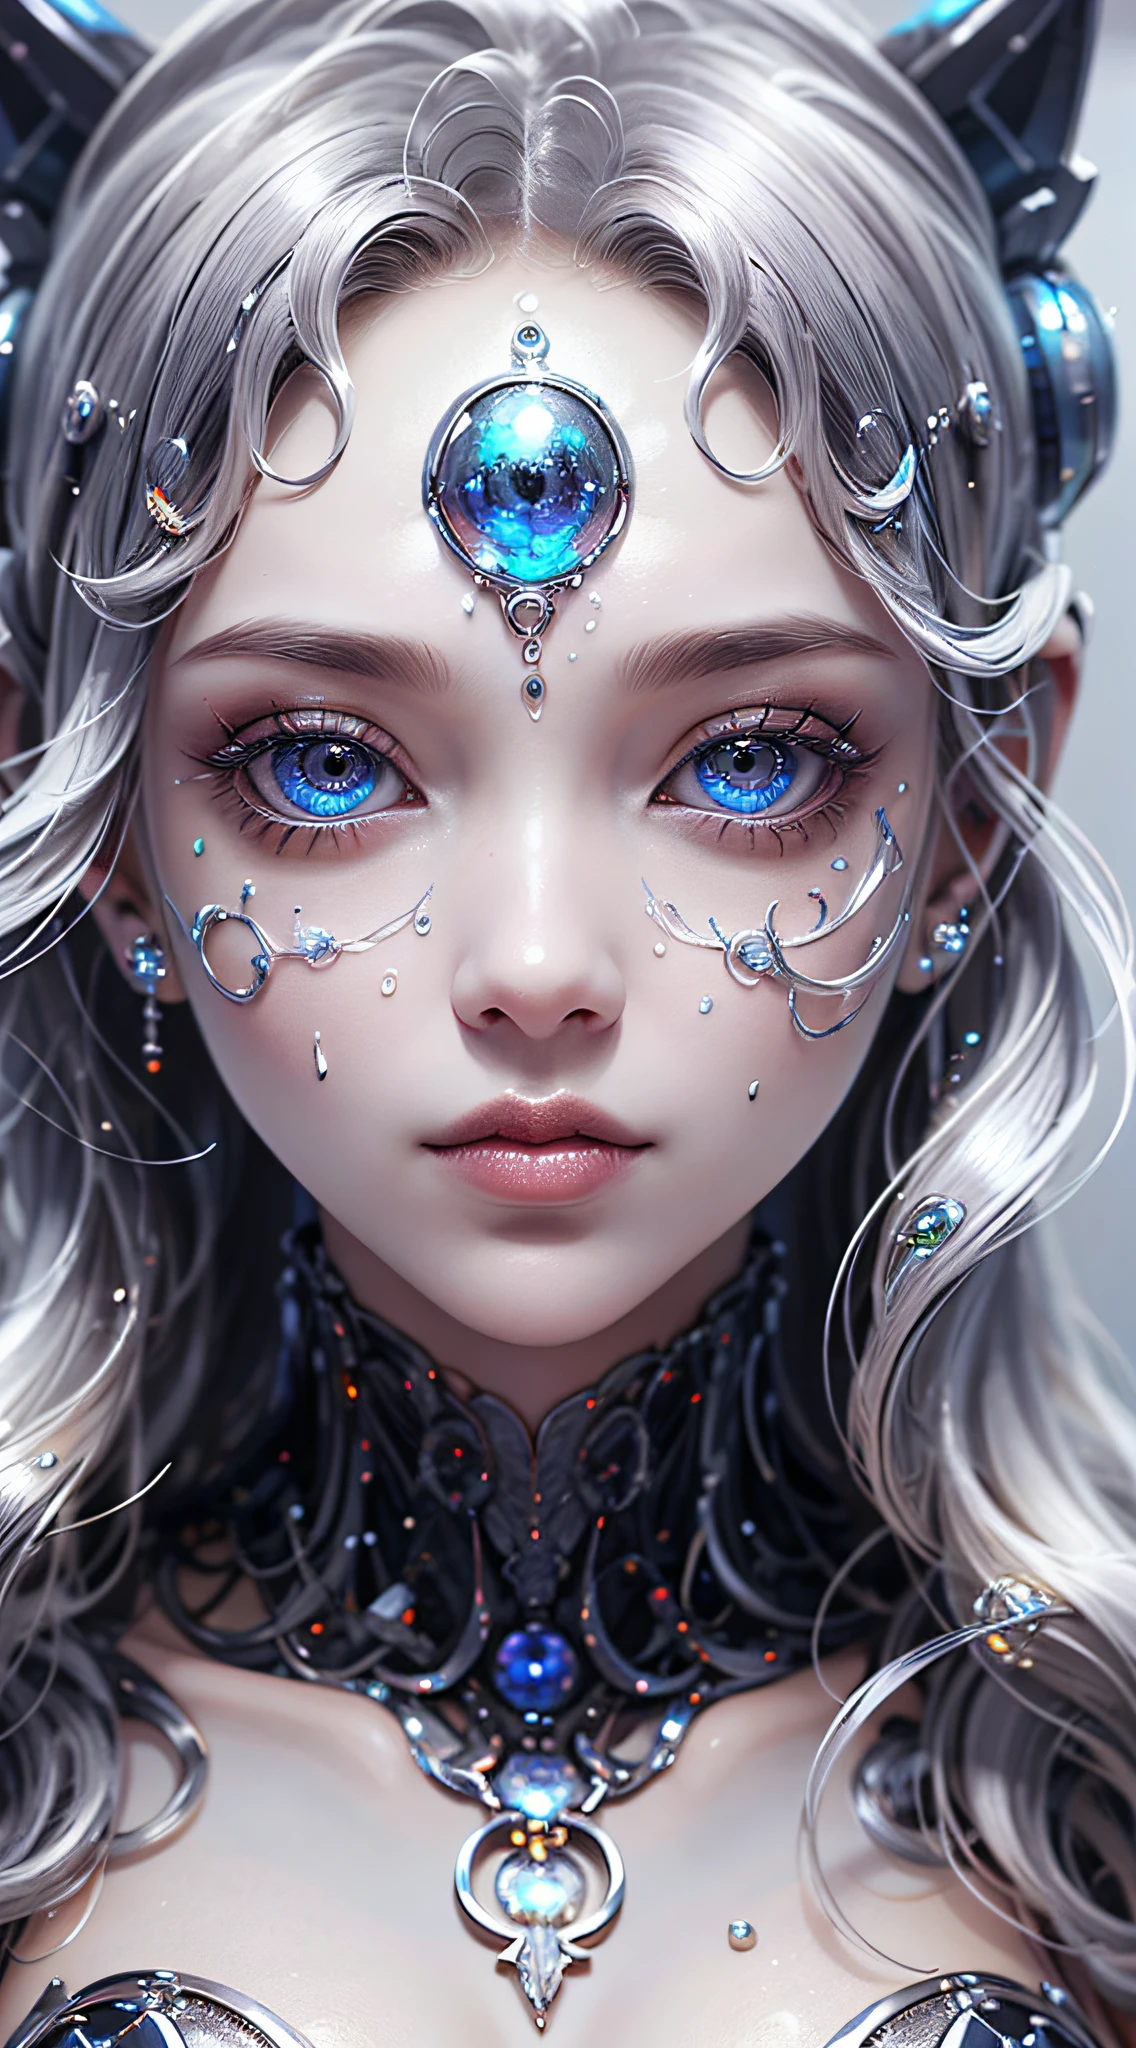 Full body like，（best qualityer，ultra - detailed，best illustration，best shade，tmasterpiece，A high resolution，ProfissionalArtwork，famousartwork），detailedeyes，beautiful eyes，clivagem em close-up，scientific fiction，colored sclera，facial eyearcas robot，Tattooed with，（fractalized，fractal eyes），eyes large，eyes wide，（eye focus），Sface Focus，Cosmic eyes，Space eyes，Close-up of metal sculpture of a woman with a moon in her hair，goddesses。Extremely high detail，3 d goddess portrait，Extremely detailed images of the goddess，a stunning portrait of a goddess，Side image of the goddess，portrait of a beautiful goddess，Full-length close-up portrait of the goddess，hecate goddess，portrait of a norse moon goddess，goddess of space and time，(Foto RAW:1.2)，camel-toe，Hollow in，suor leggs，white liquid， smooth pink skin, shiny metallic glossy skin, shiny, 　spread their legs　legs in M shape，olhar vred，discomfort，vred， all over body，Full body like